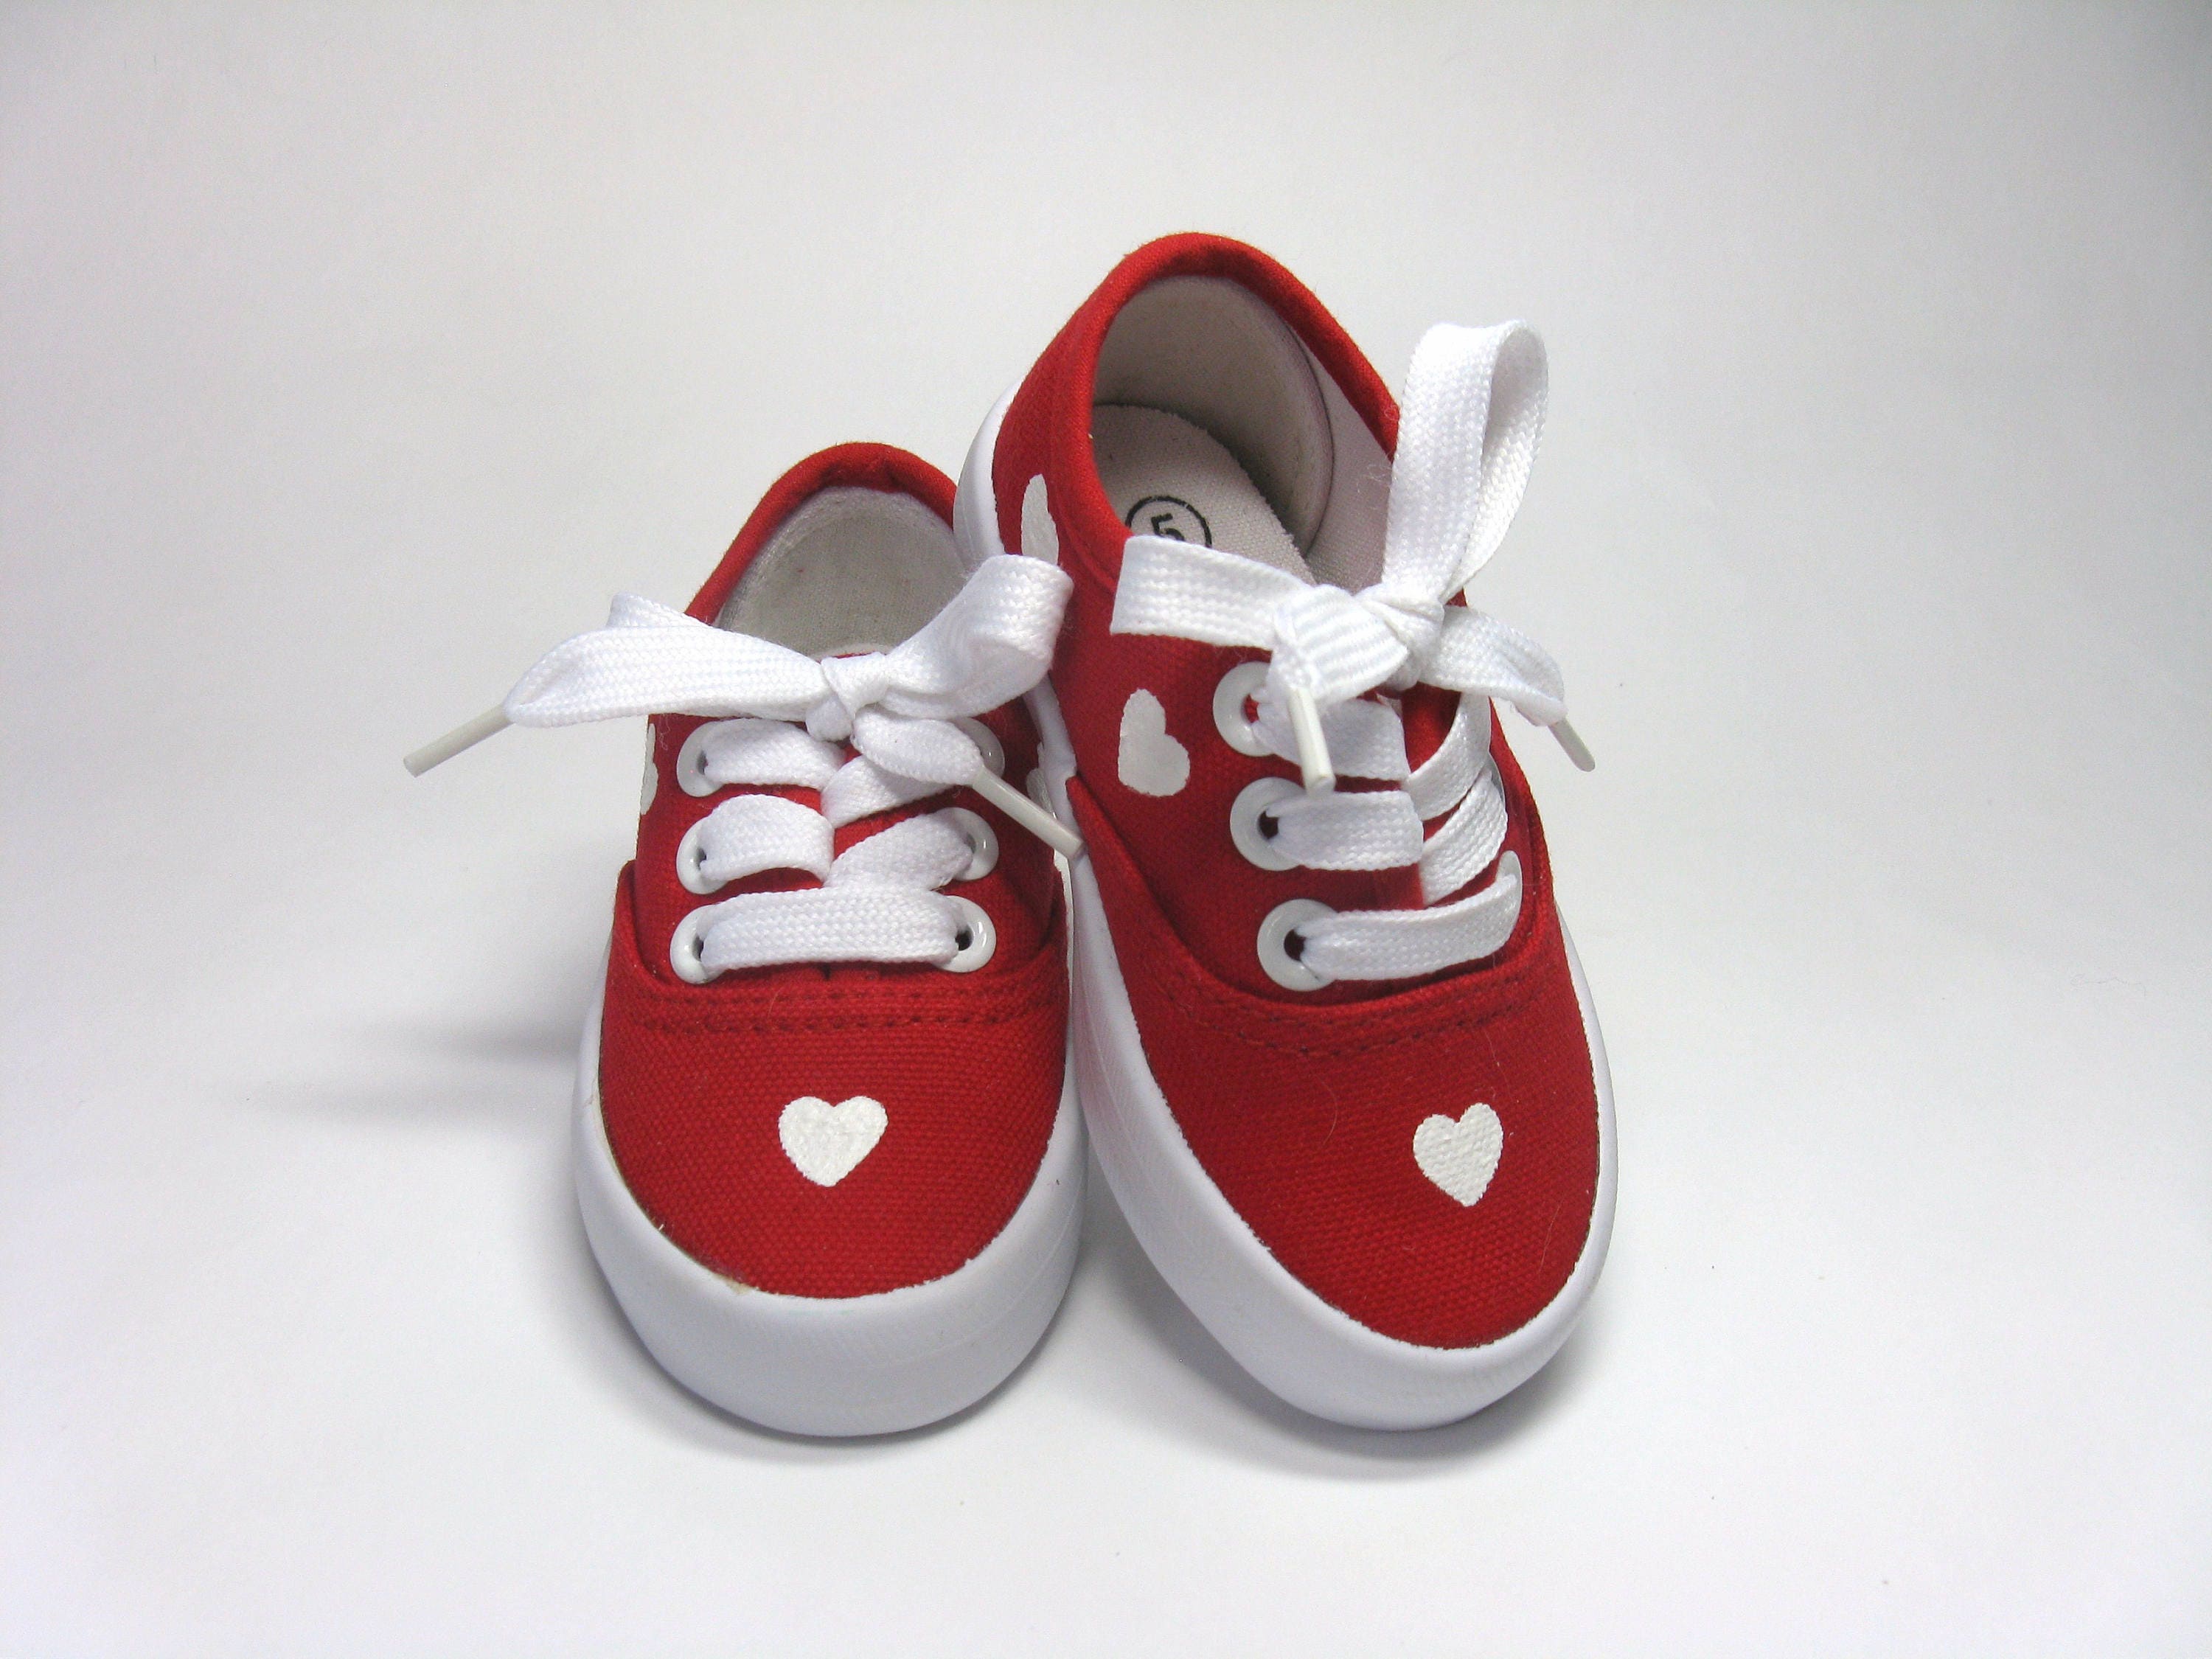 Cat & Jack Beasley Boys Red Canvas Sneakers Toddler Size 9 New | eBay